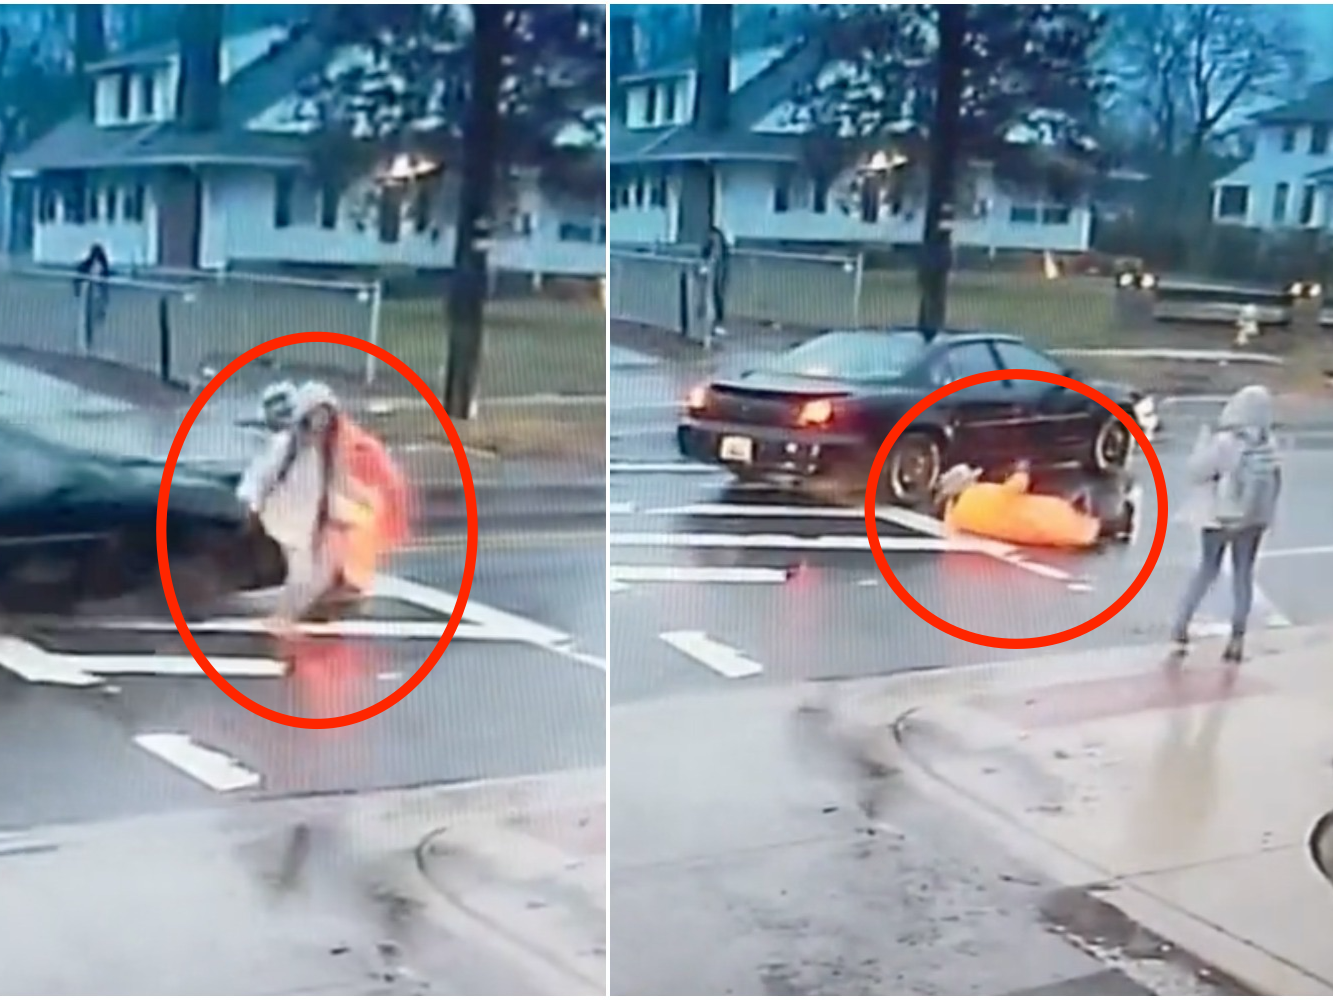 Screenshots of footage showing a crossing guard getting struck down by a car, saving a student